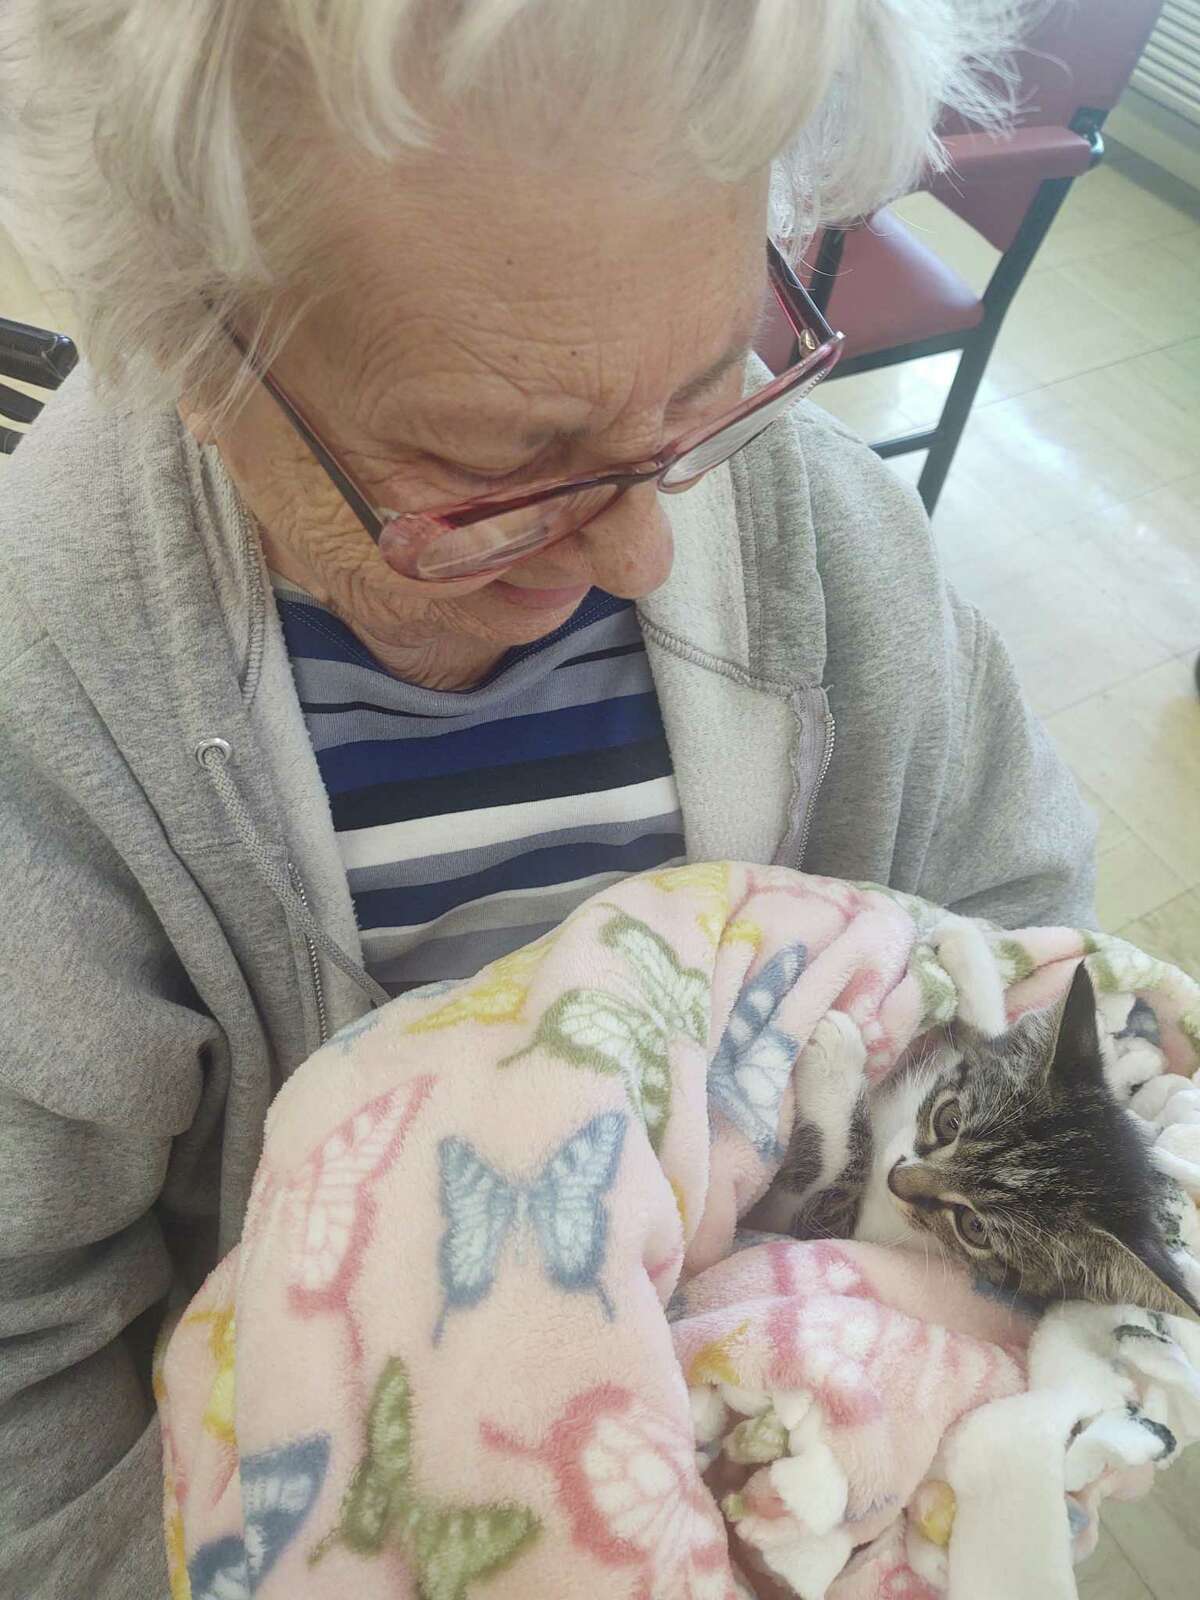 Eight rescue kittens from Westchester-based Rock ‘n Rescue visited residents at New Milford’s Village Crest Center for Health and Rehabilitation. Village Crest resident Janet Scott is pictured.